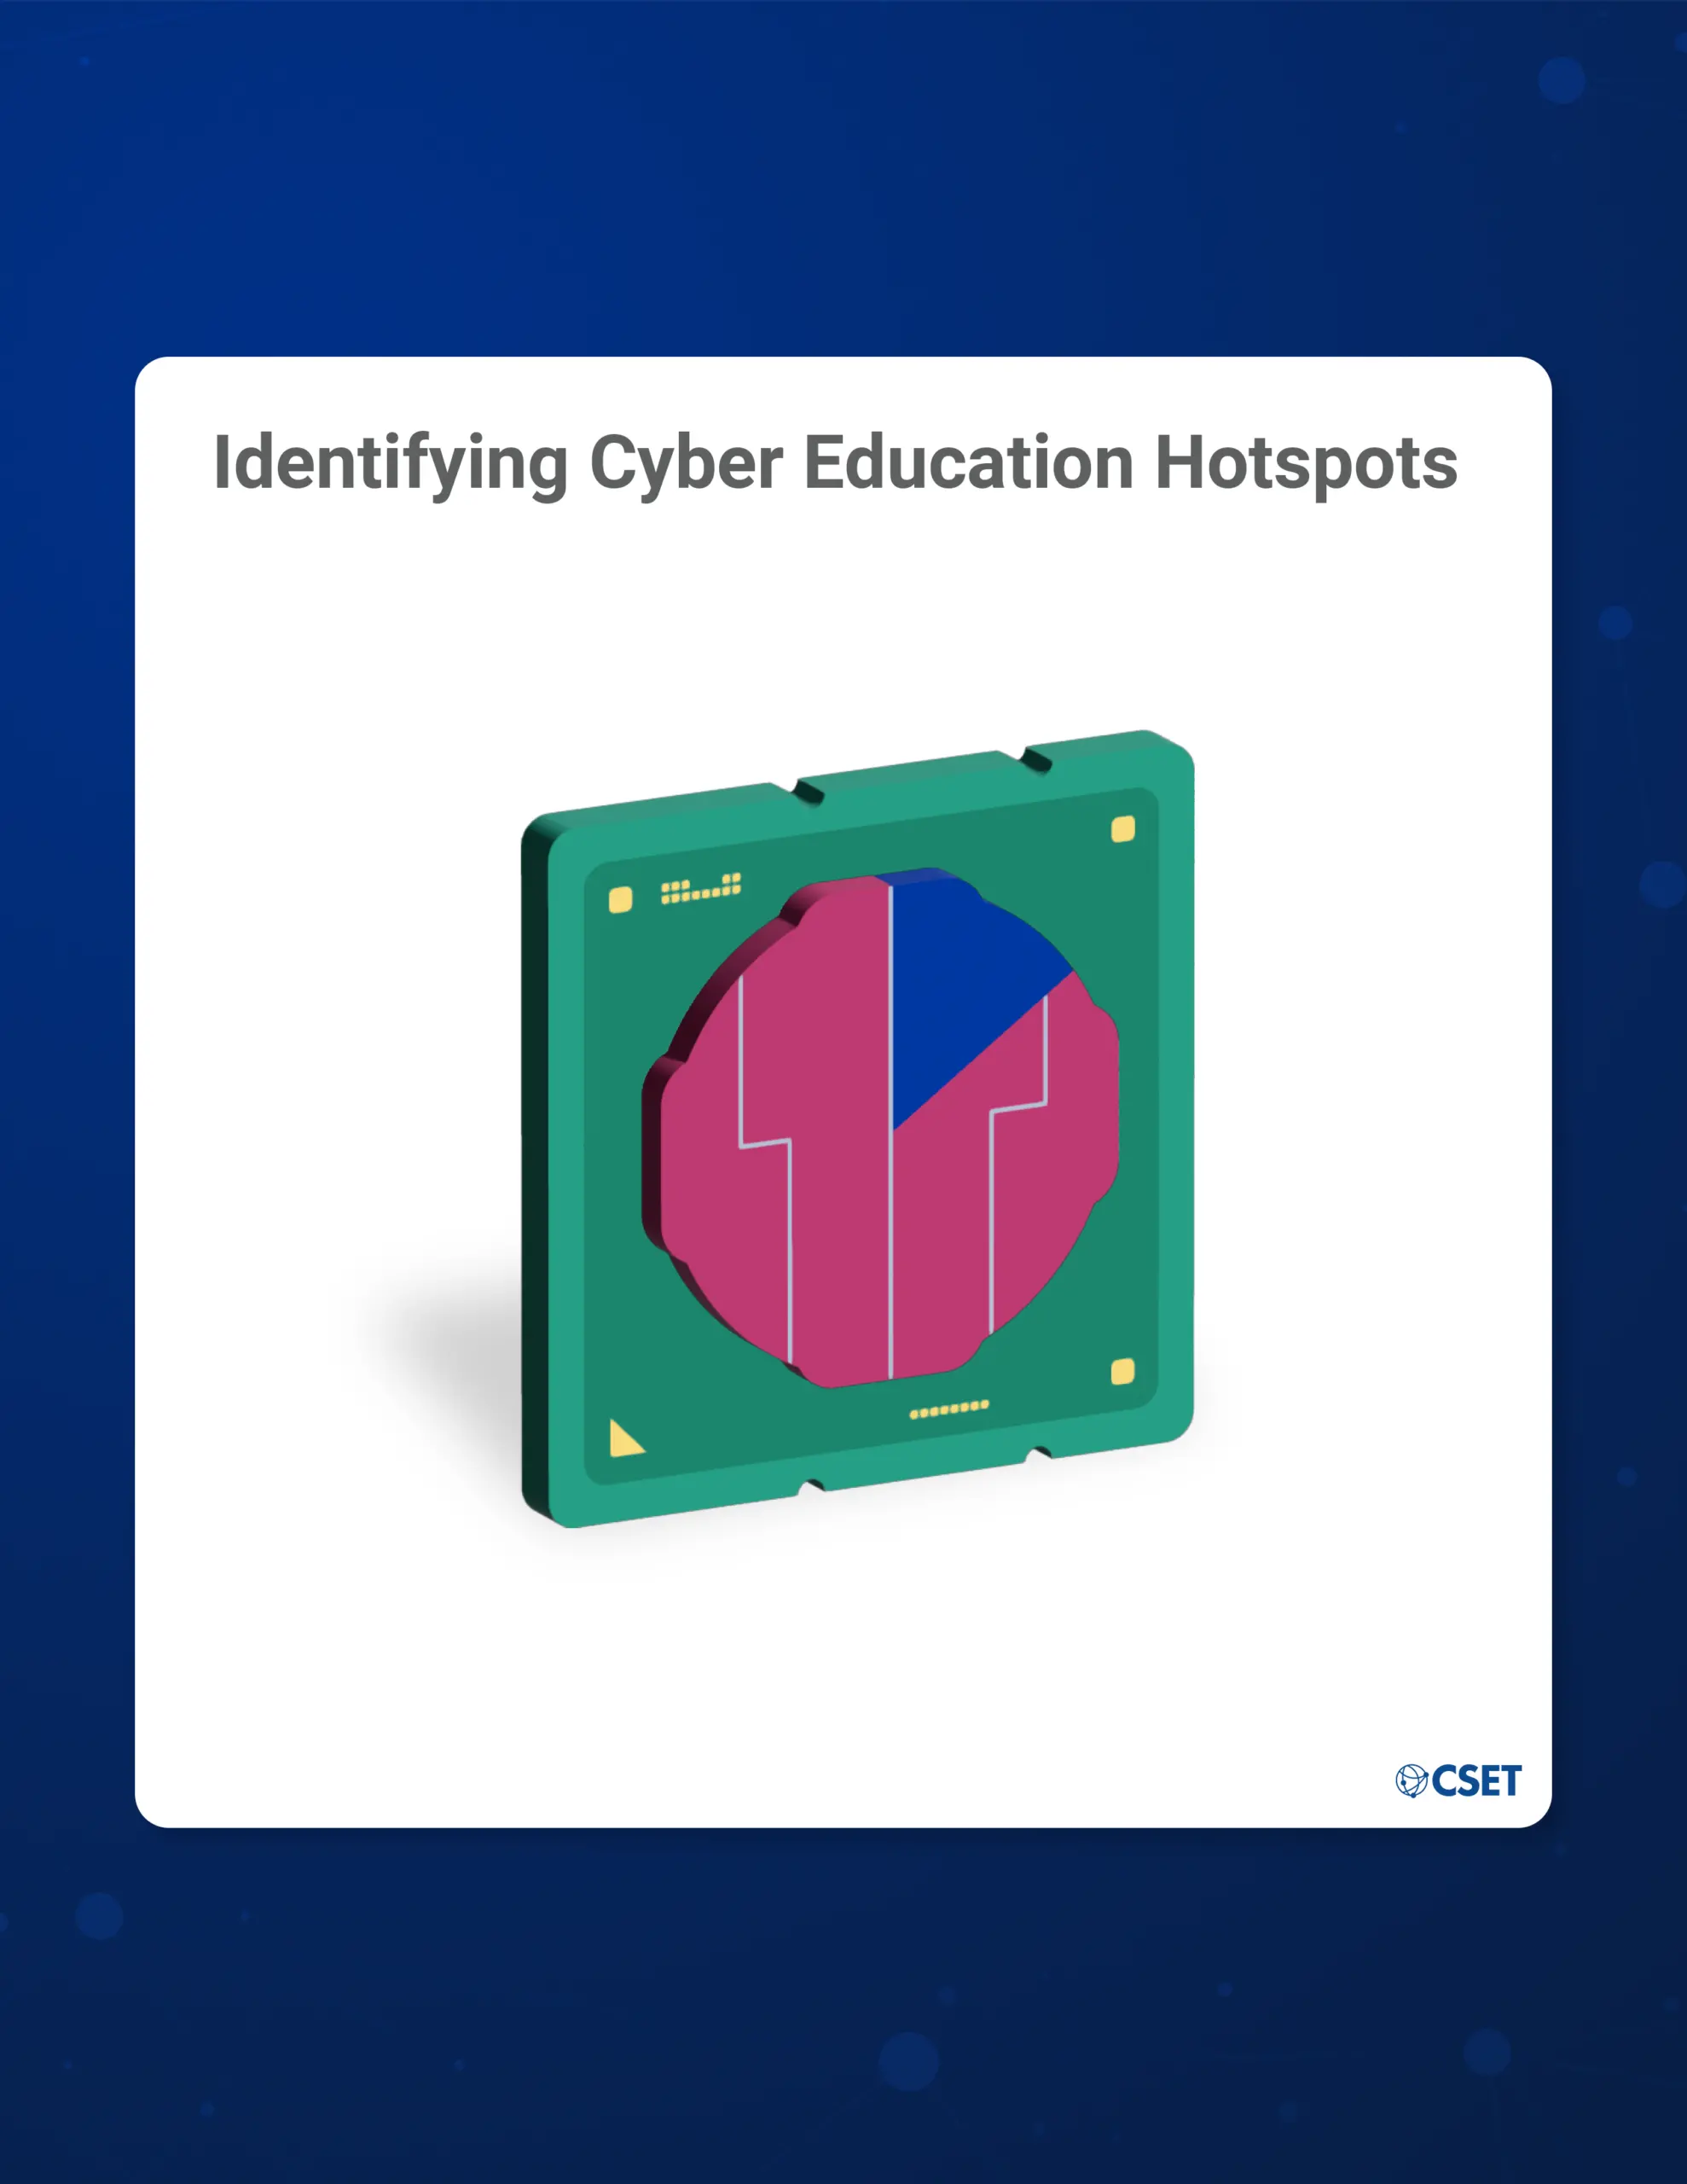 Identifying Cyber Education Hotspots: An Interactive Guide - Cover - Image of a computer chip with a pie graph in the center